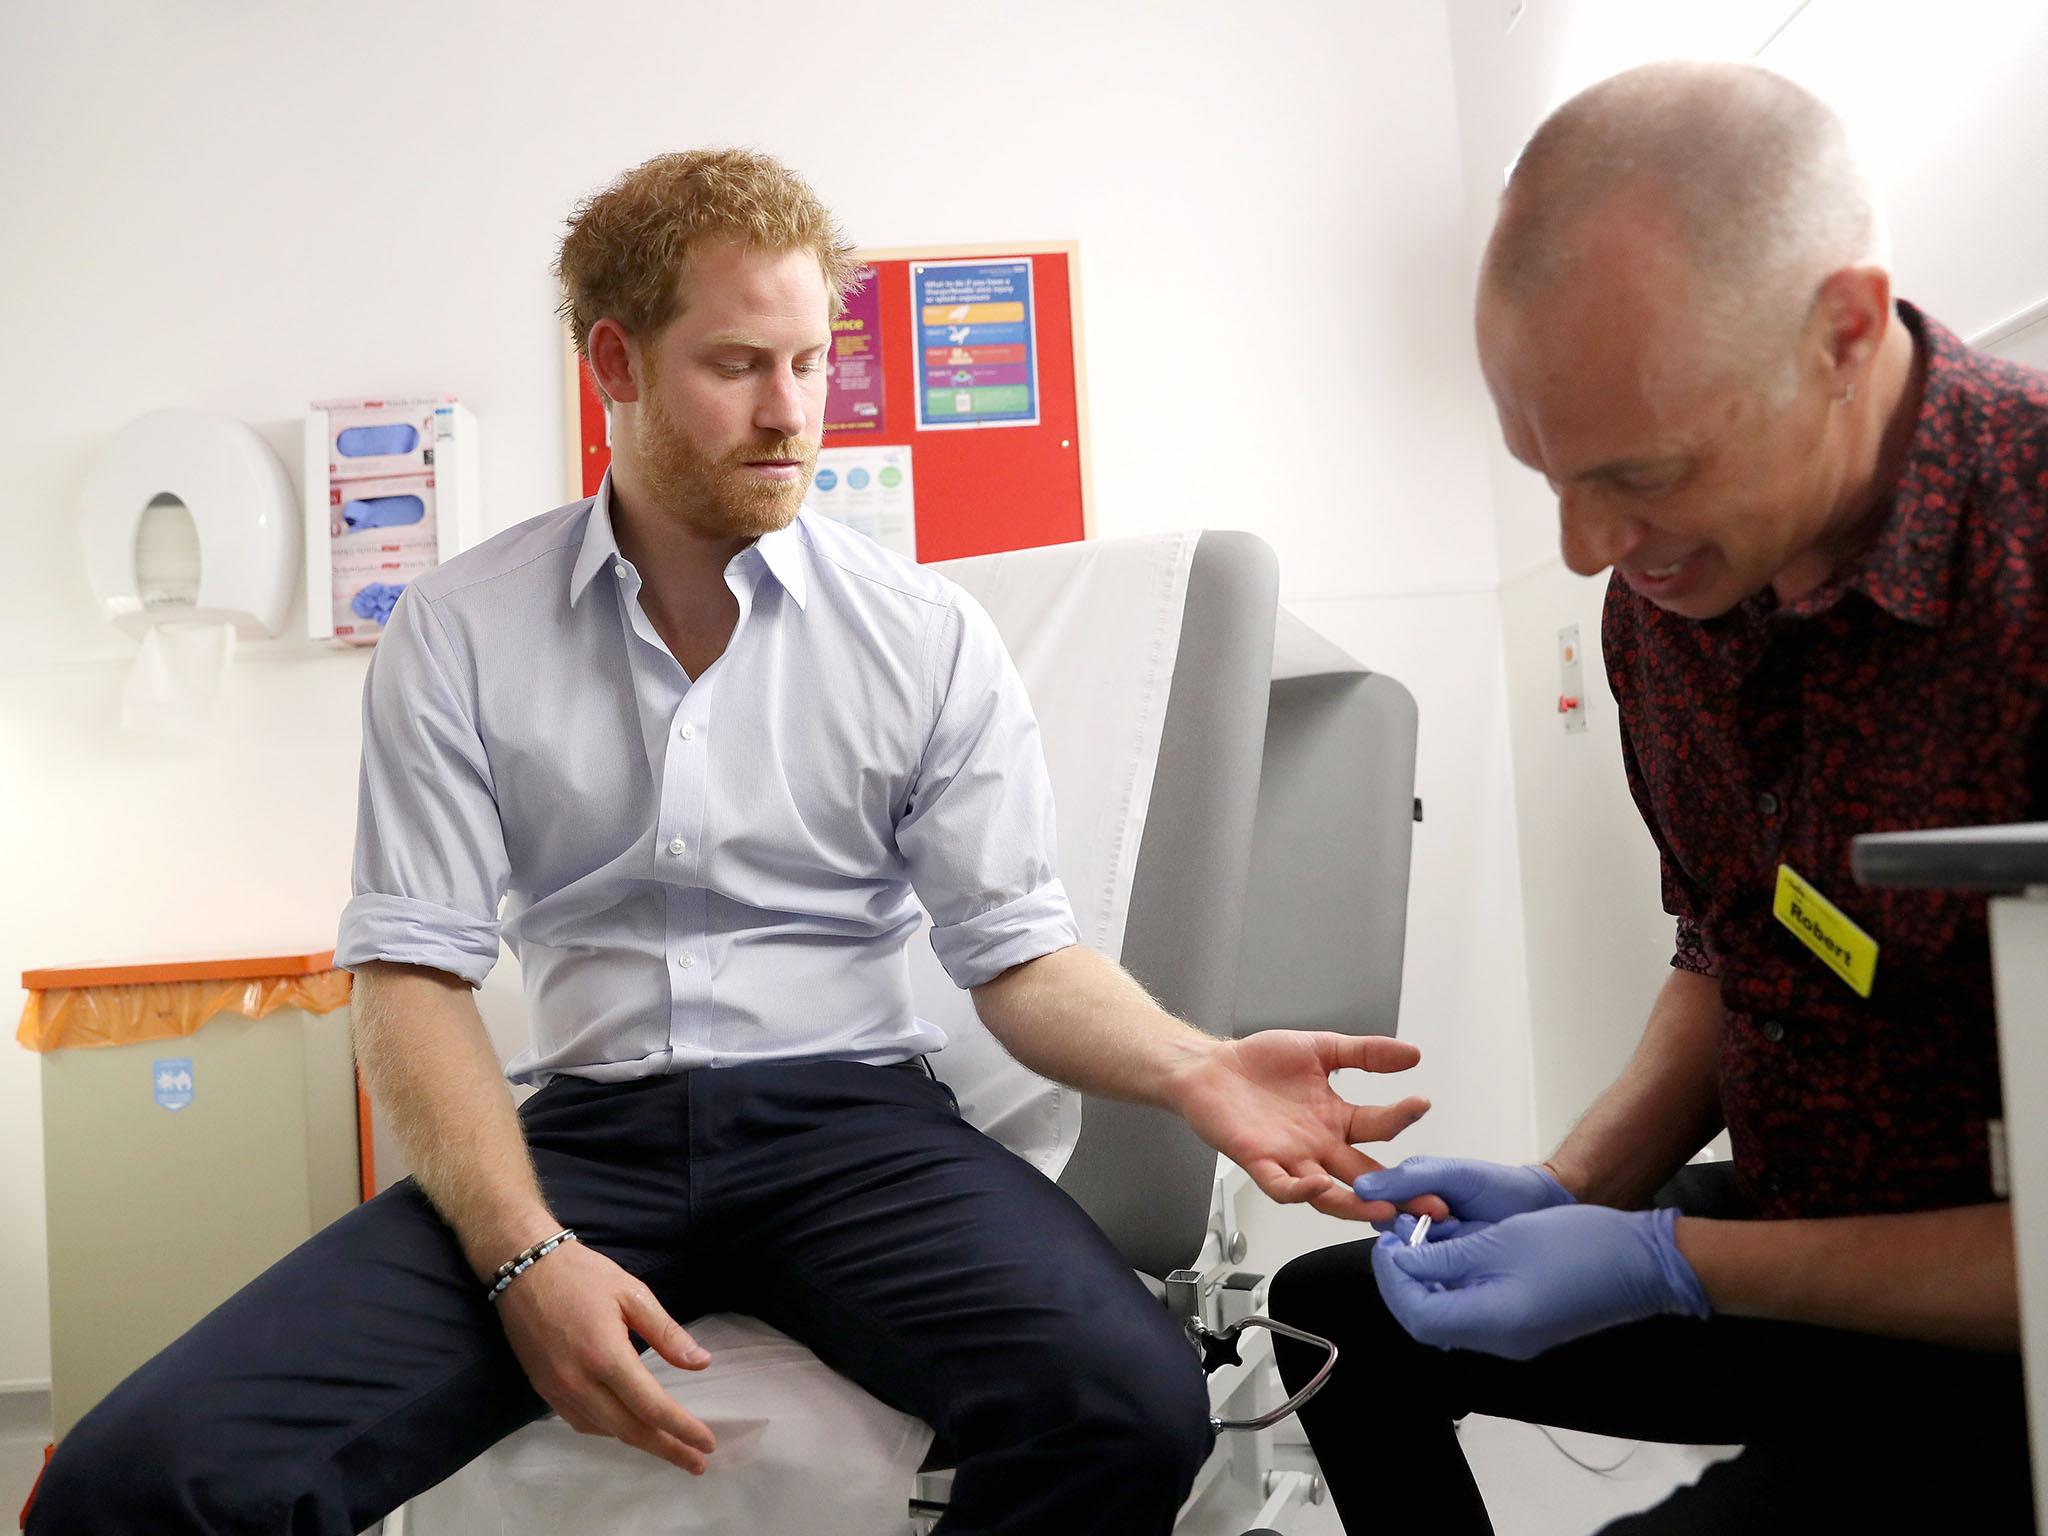 Prince Harry had a HIV test broadcast on Facebook Live in a bid to encourage more people to get checked